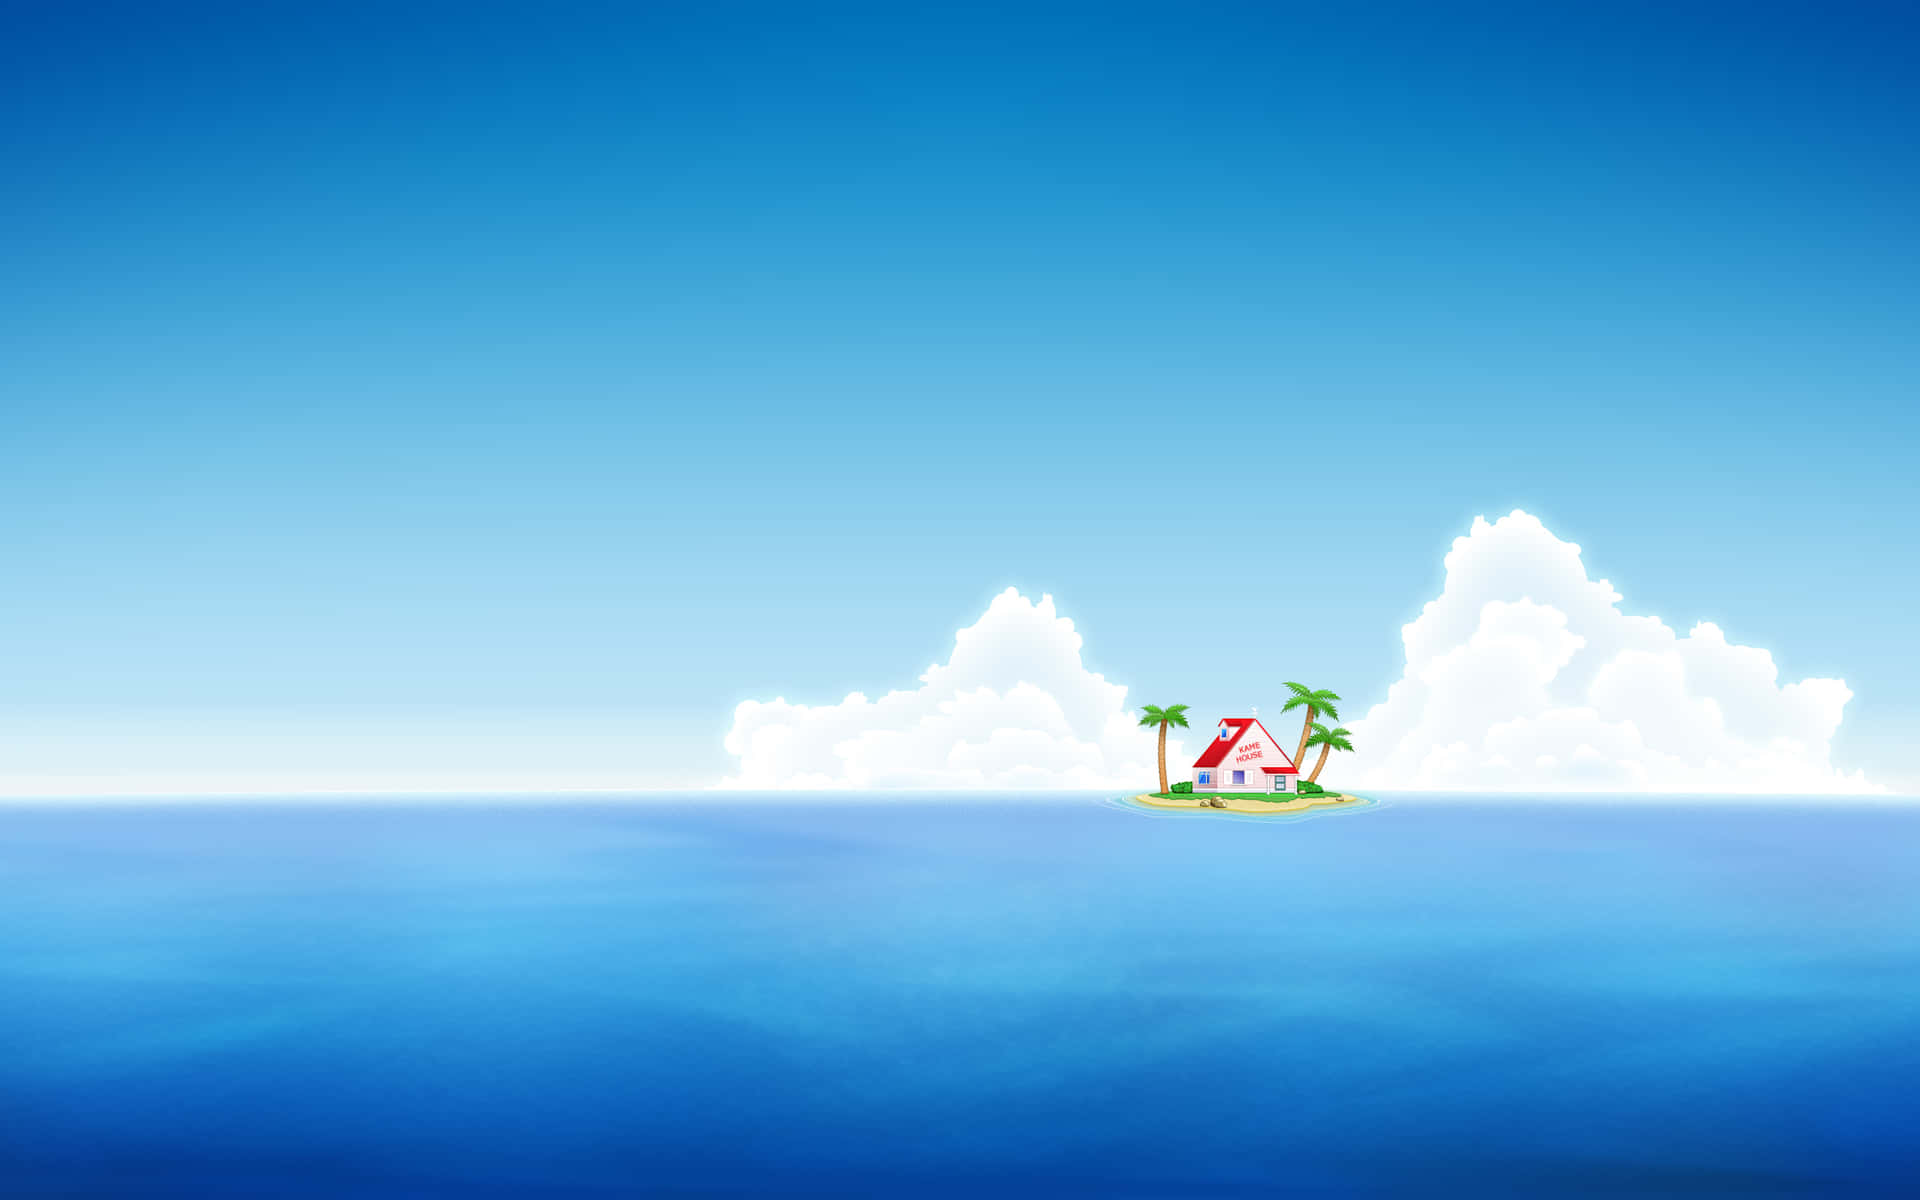 A Small Island With A Palm Tree In The Ocean Wallpaper